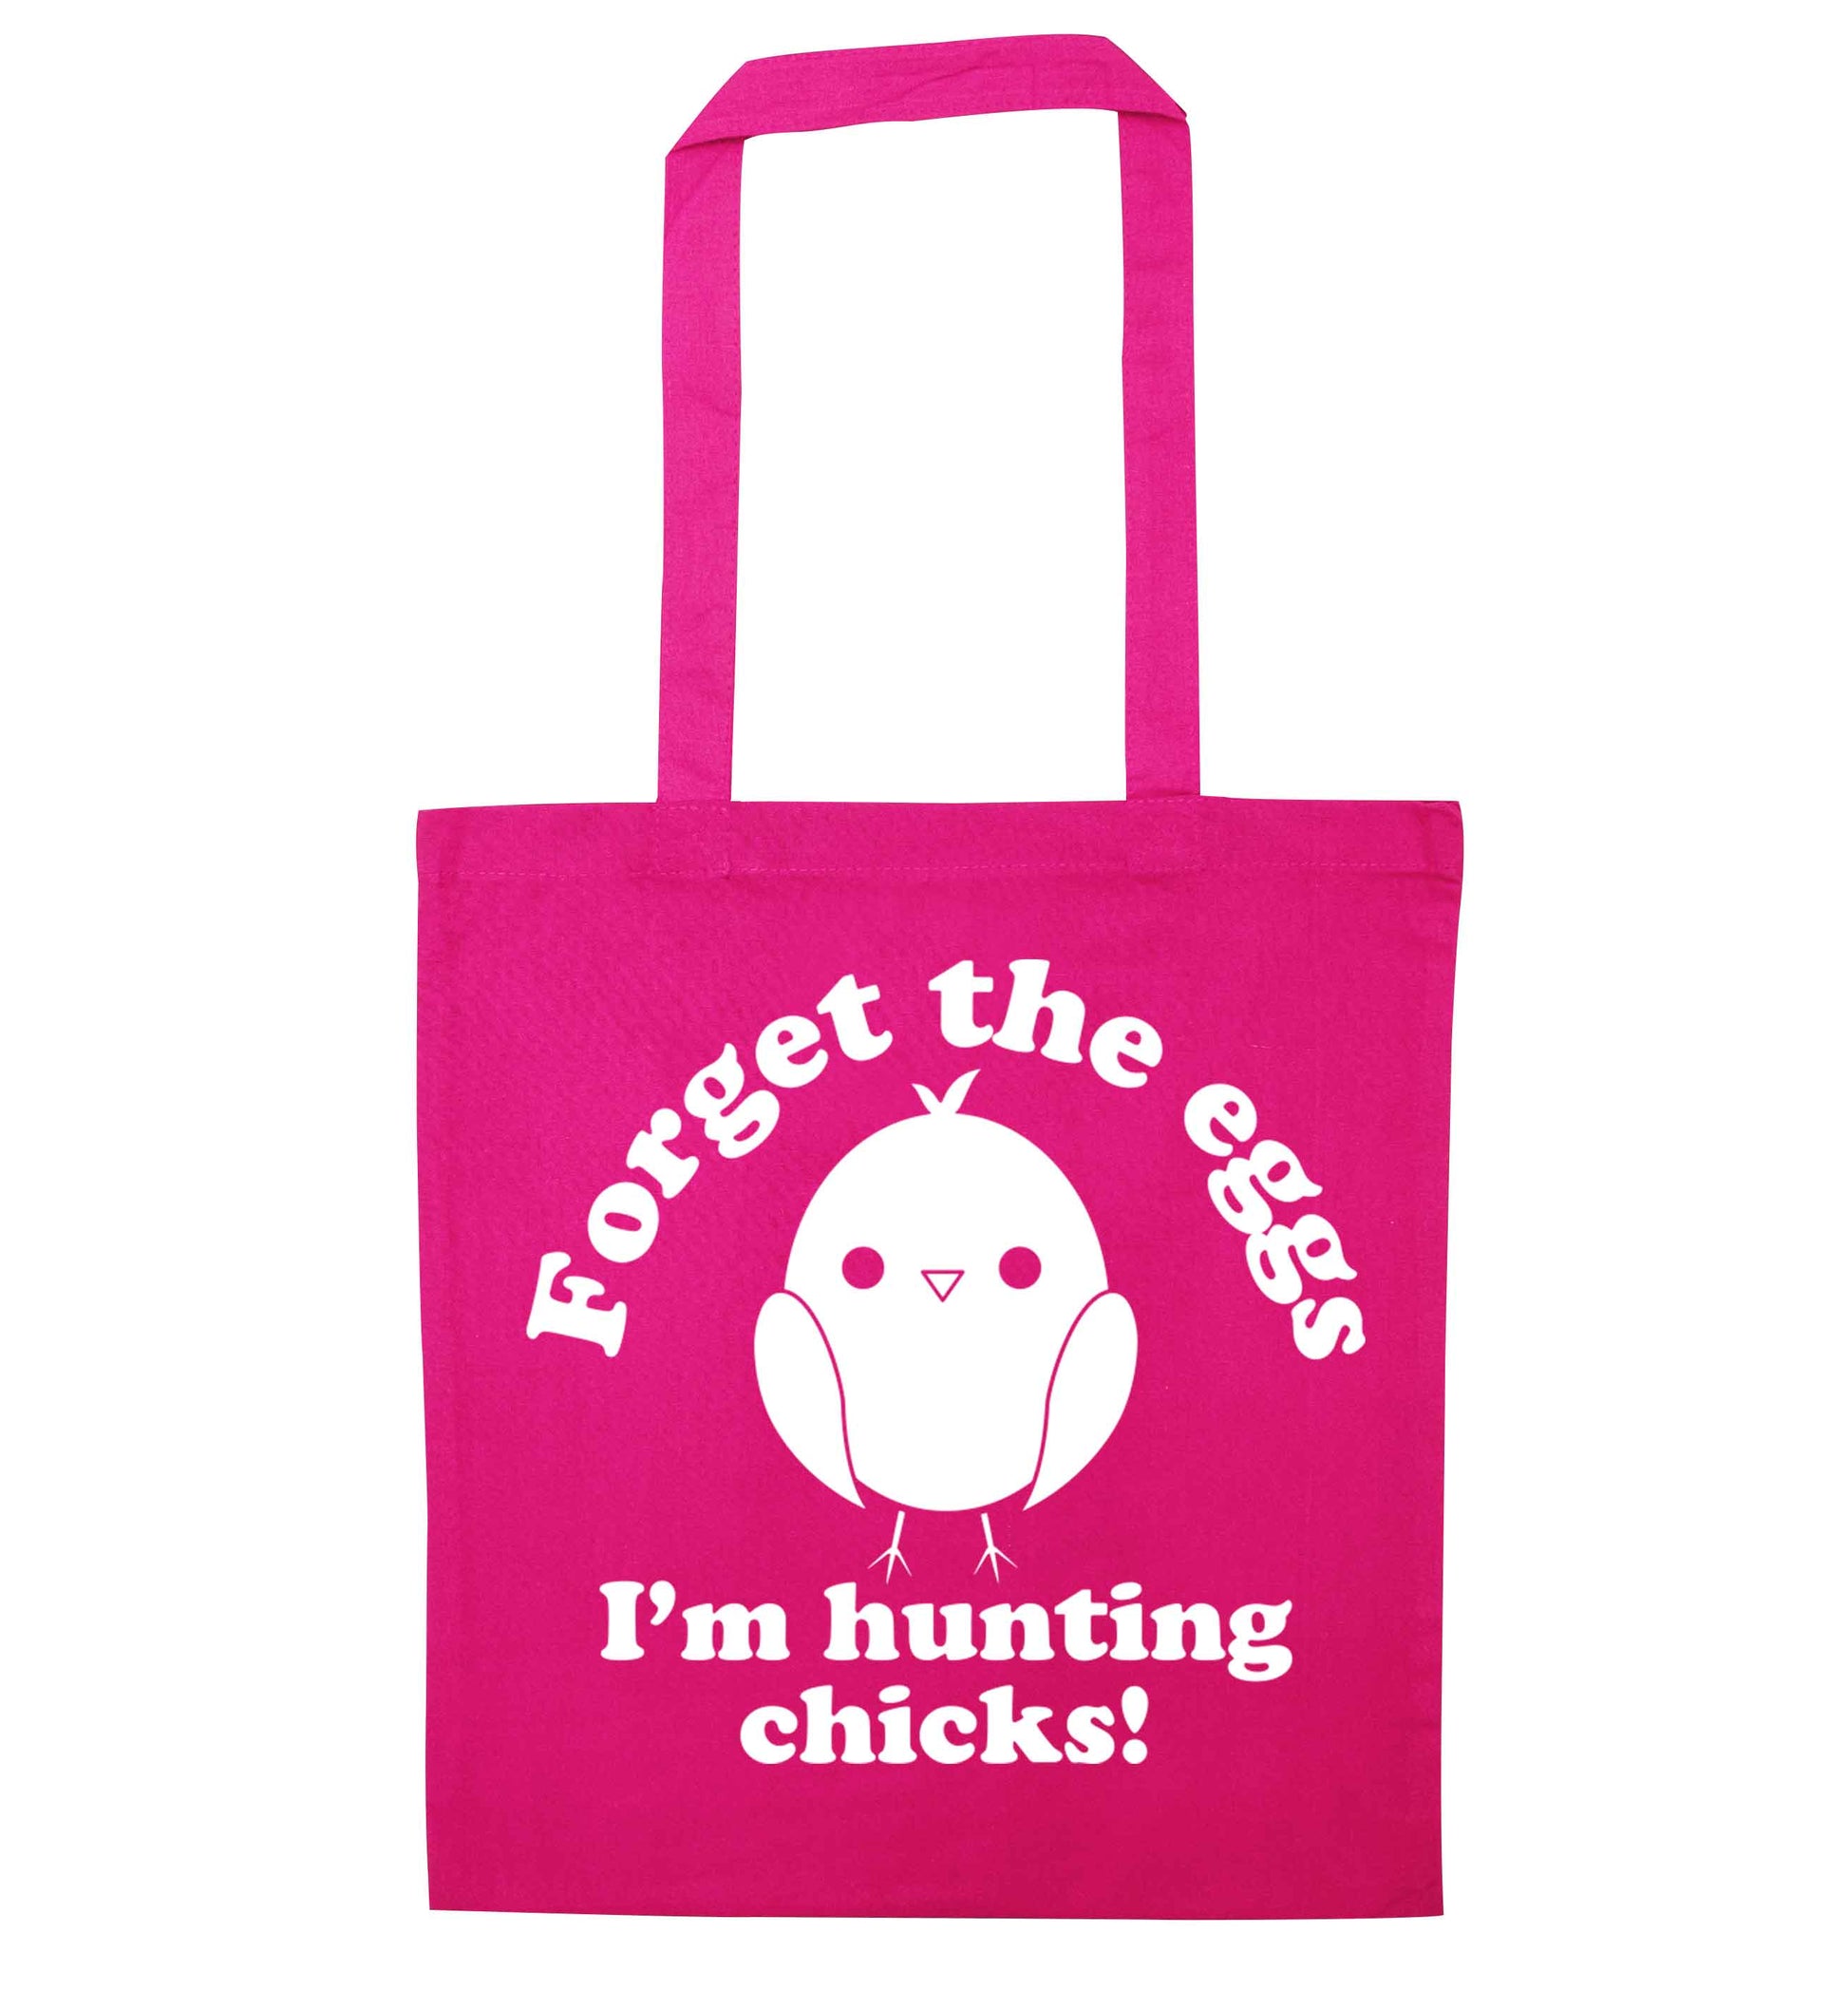 Forget the eggs I'm hunting chicks! pink tote bag